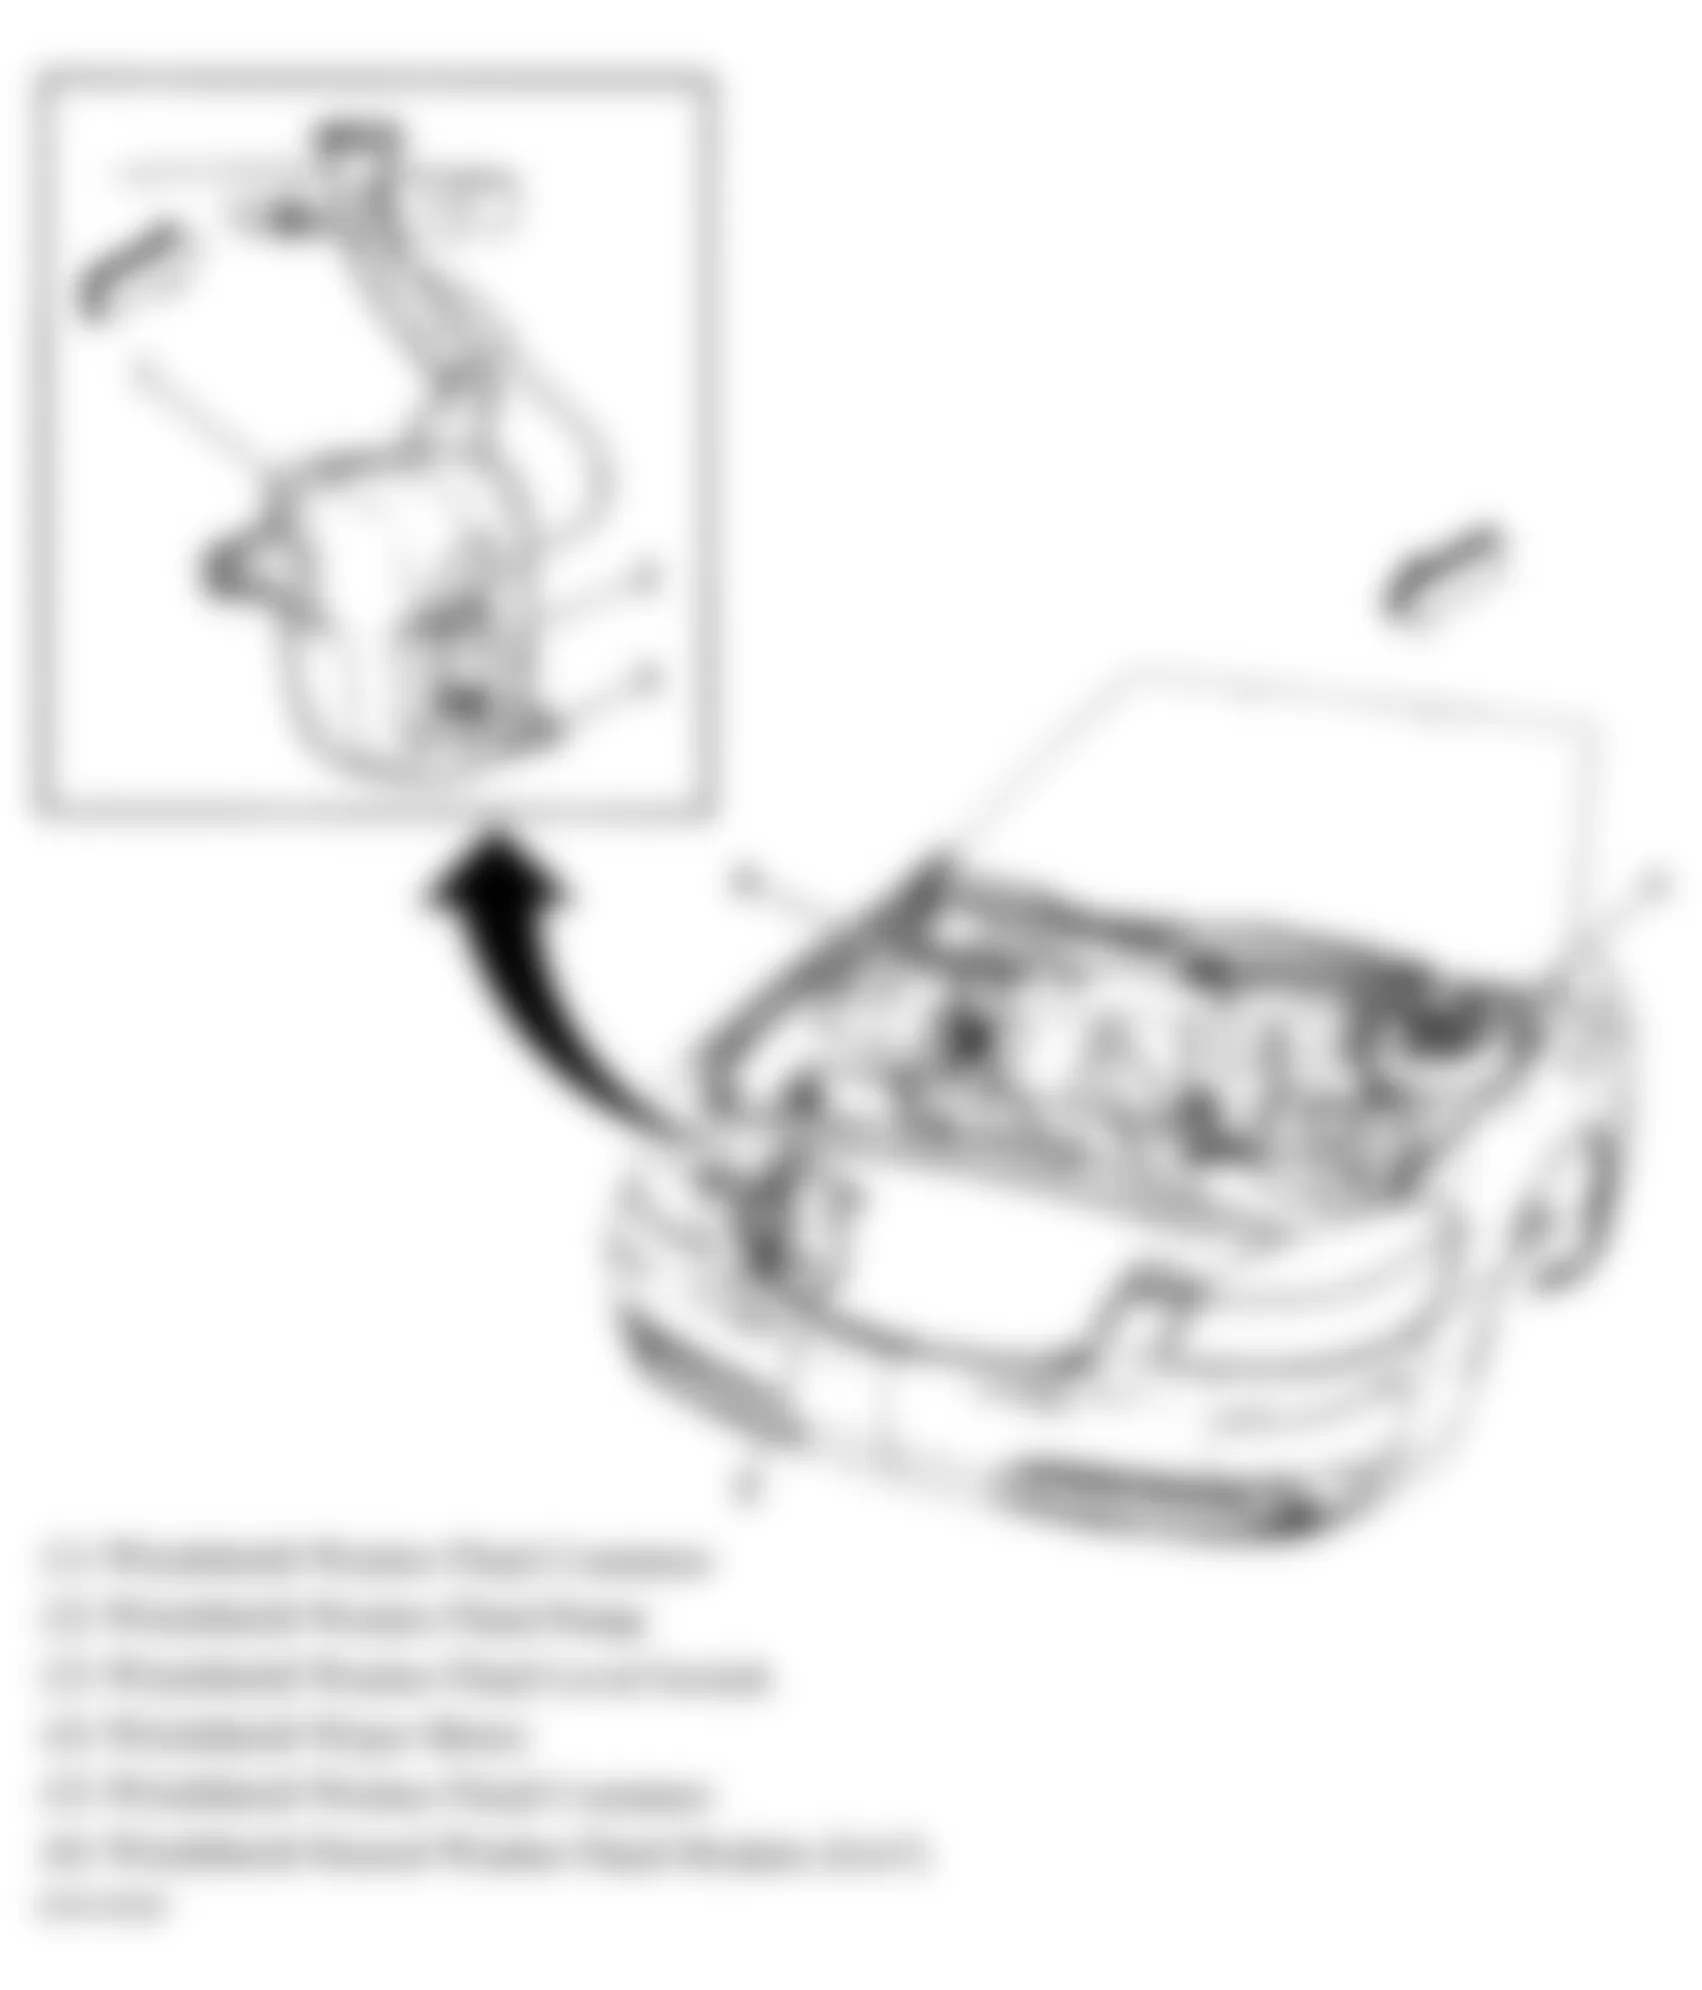 Buick Lucerne CXL 2006 - Component Locations -  Engine Compartment